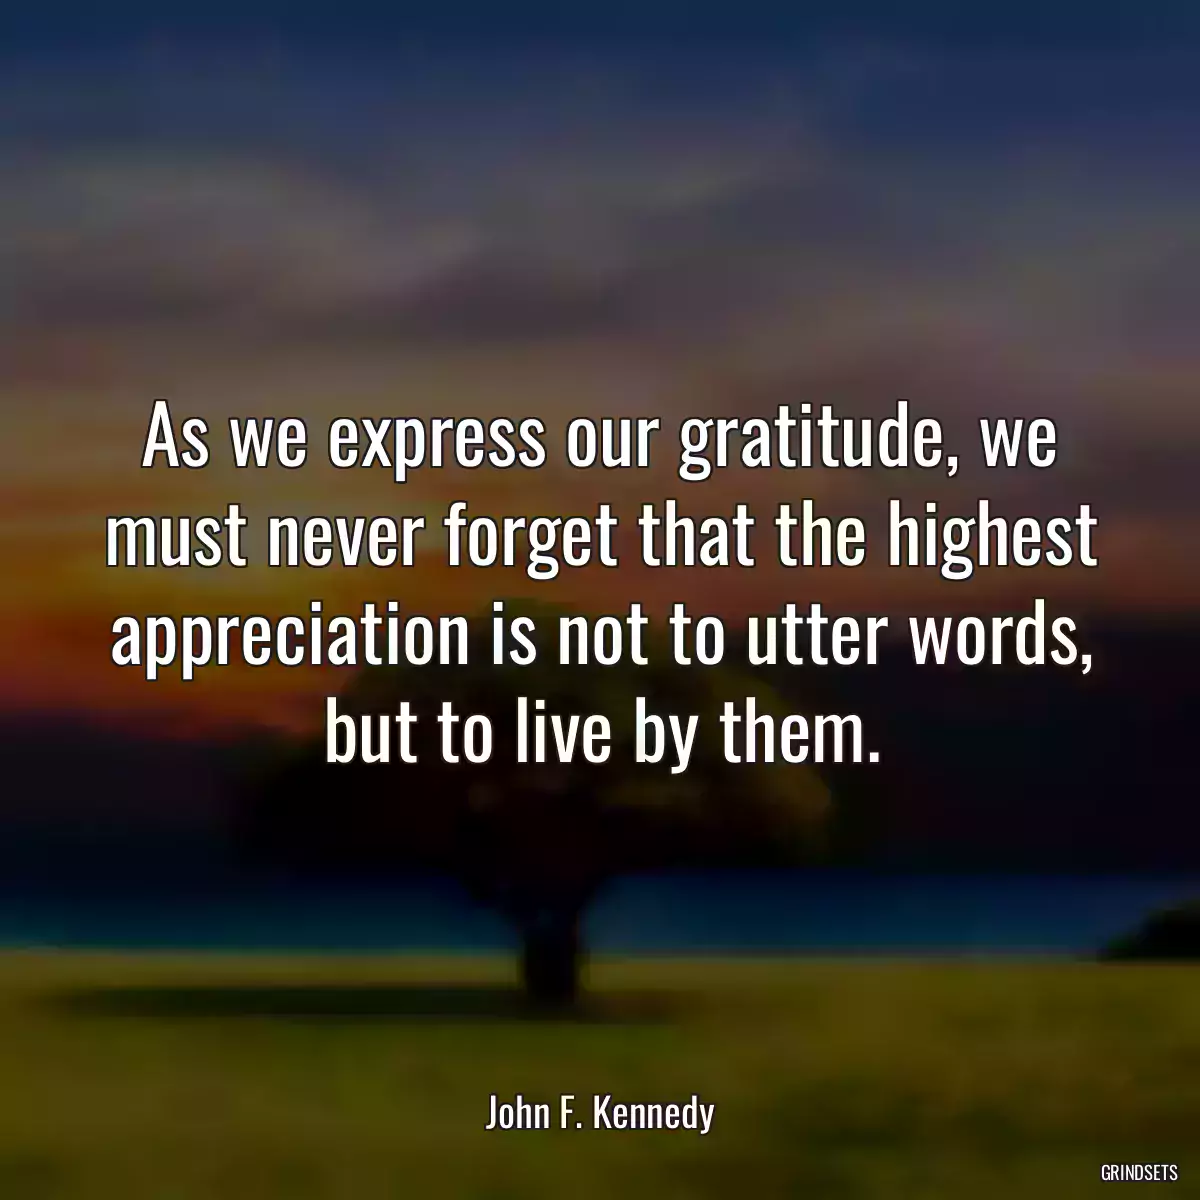 As we express our gratitude, we must never forget that the highest appreciation is not to utter words, but to live by them.